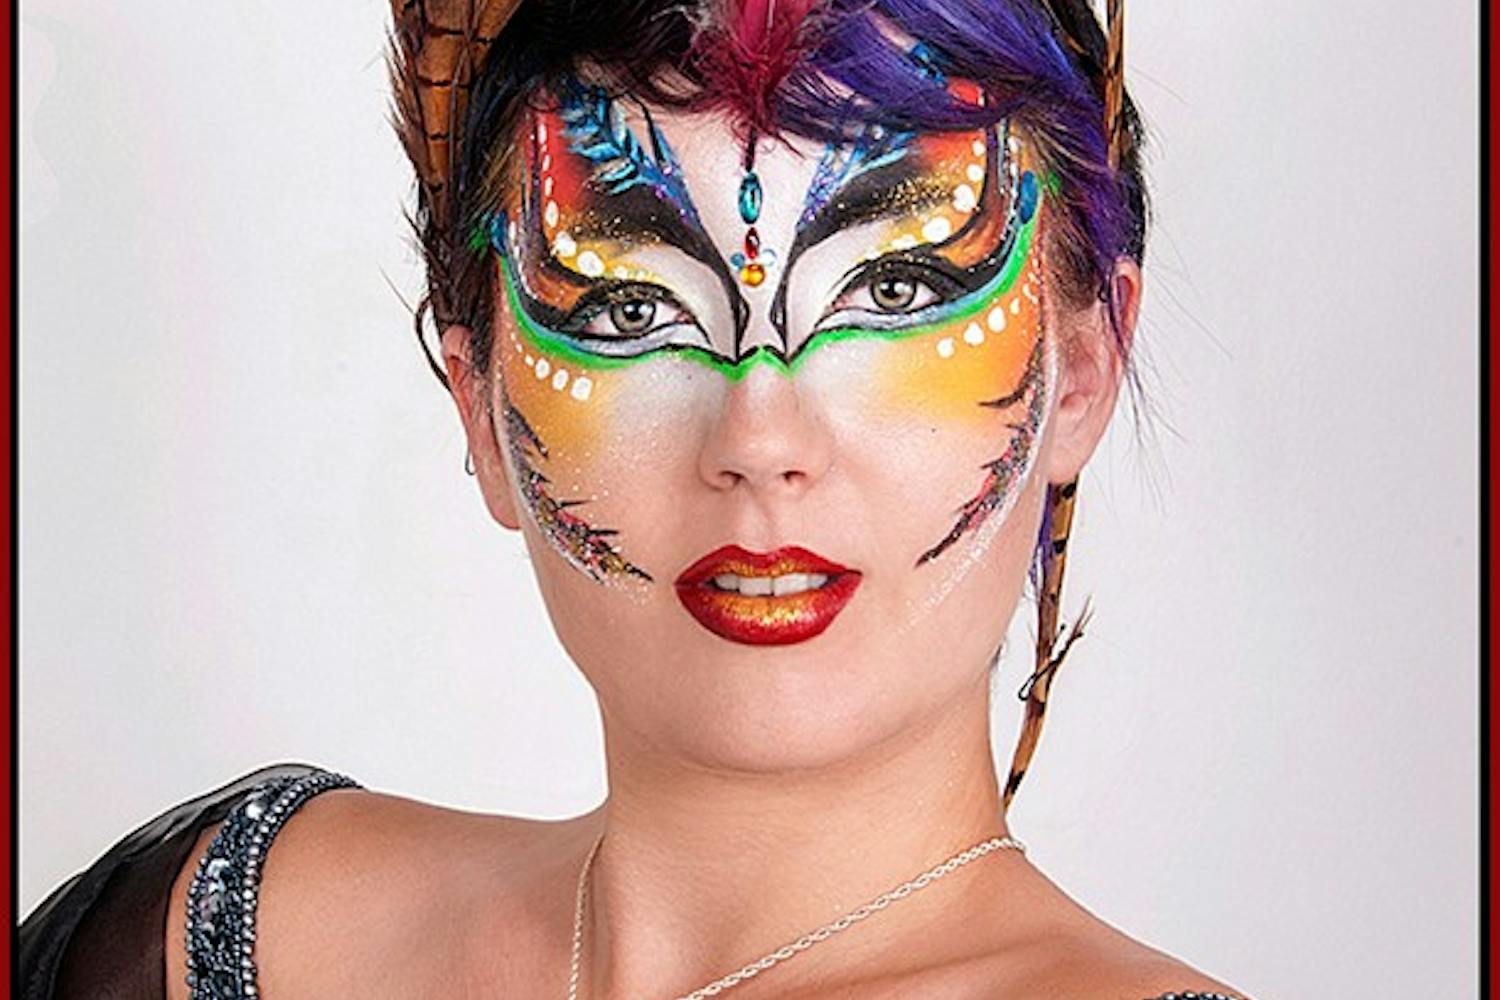 Intricate makeup covers the face of a French model.
Photo contributed by Michael Traynor